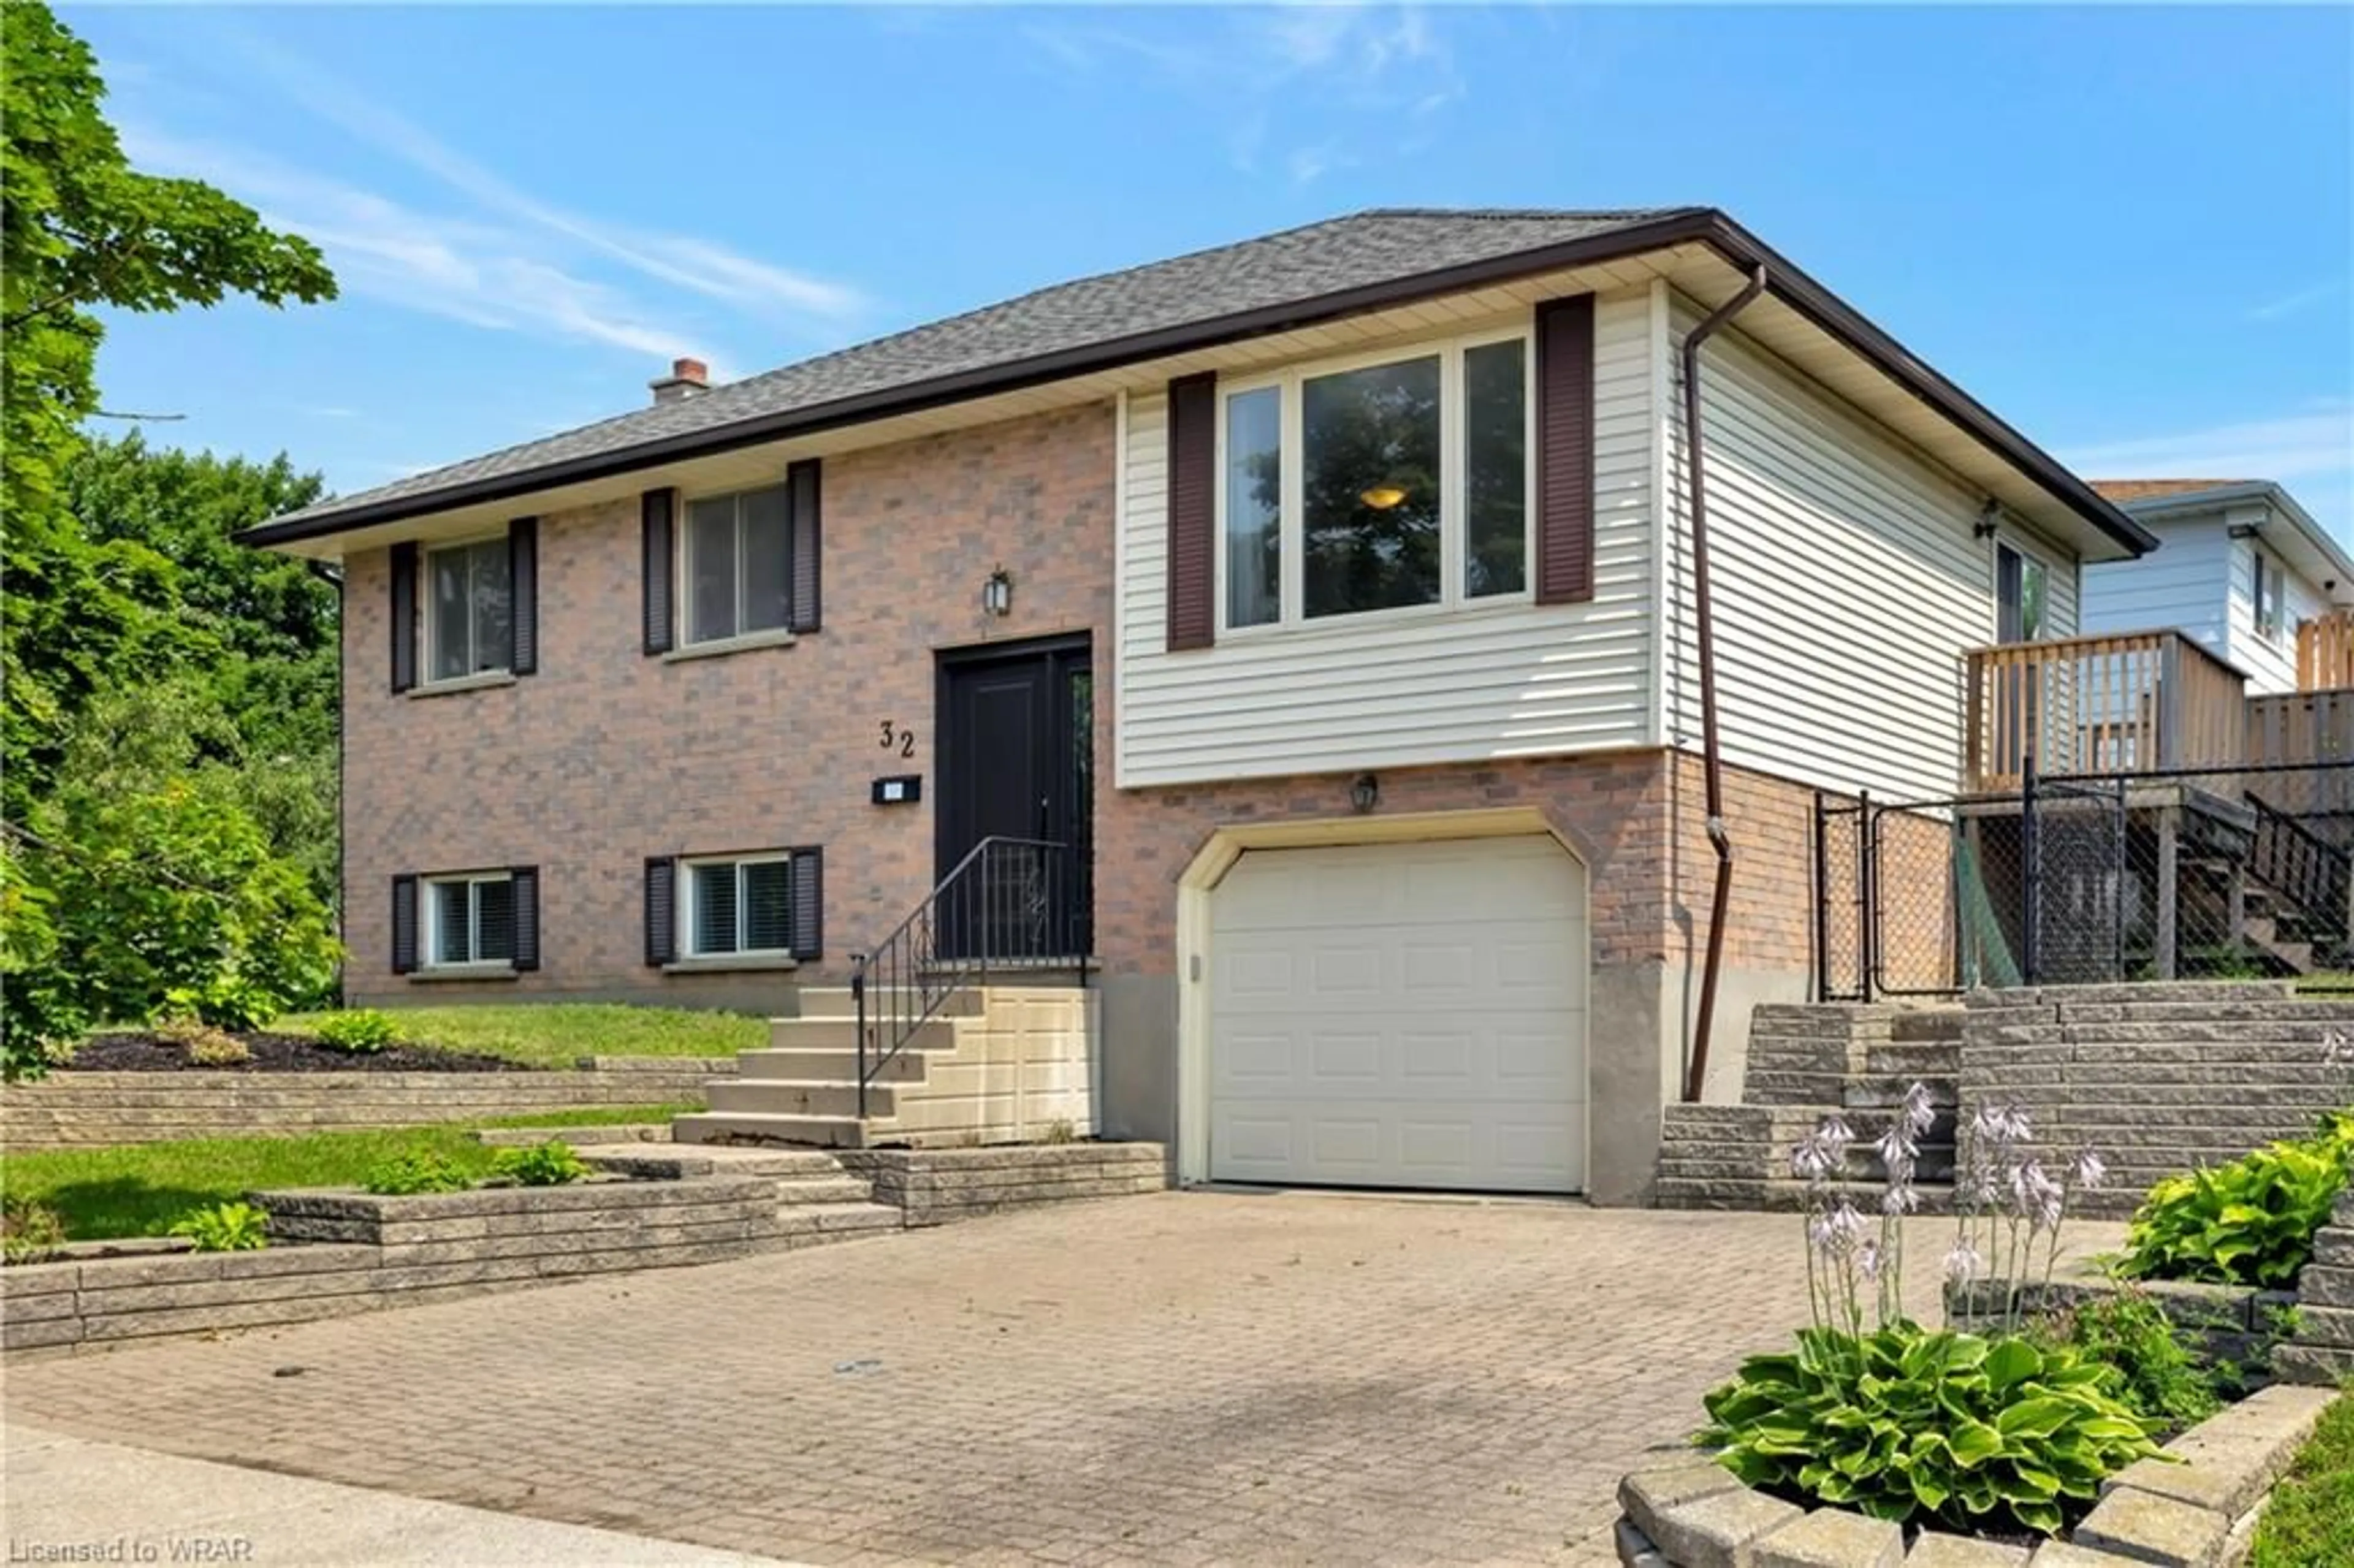 Home with brick exterior material for 32 Settlers Dr, Kitchener Ontario N2E 2L3